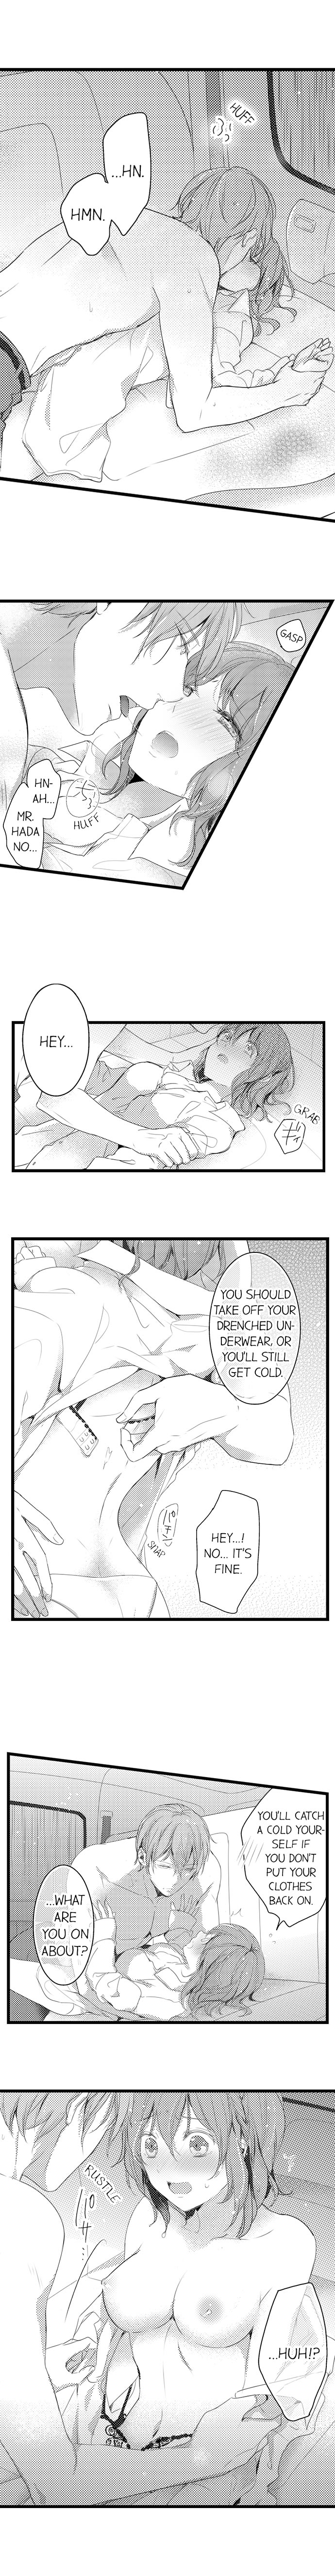 A Hot Night With My Boss in a Capsule Hotel - Chapter 8 Page 3